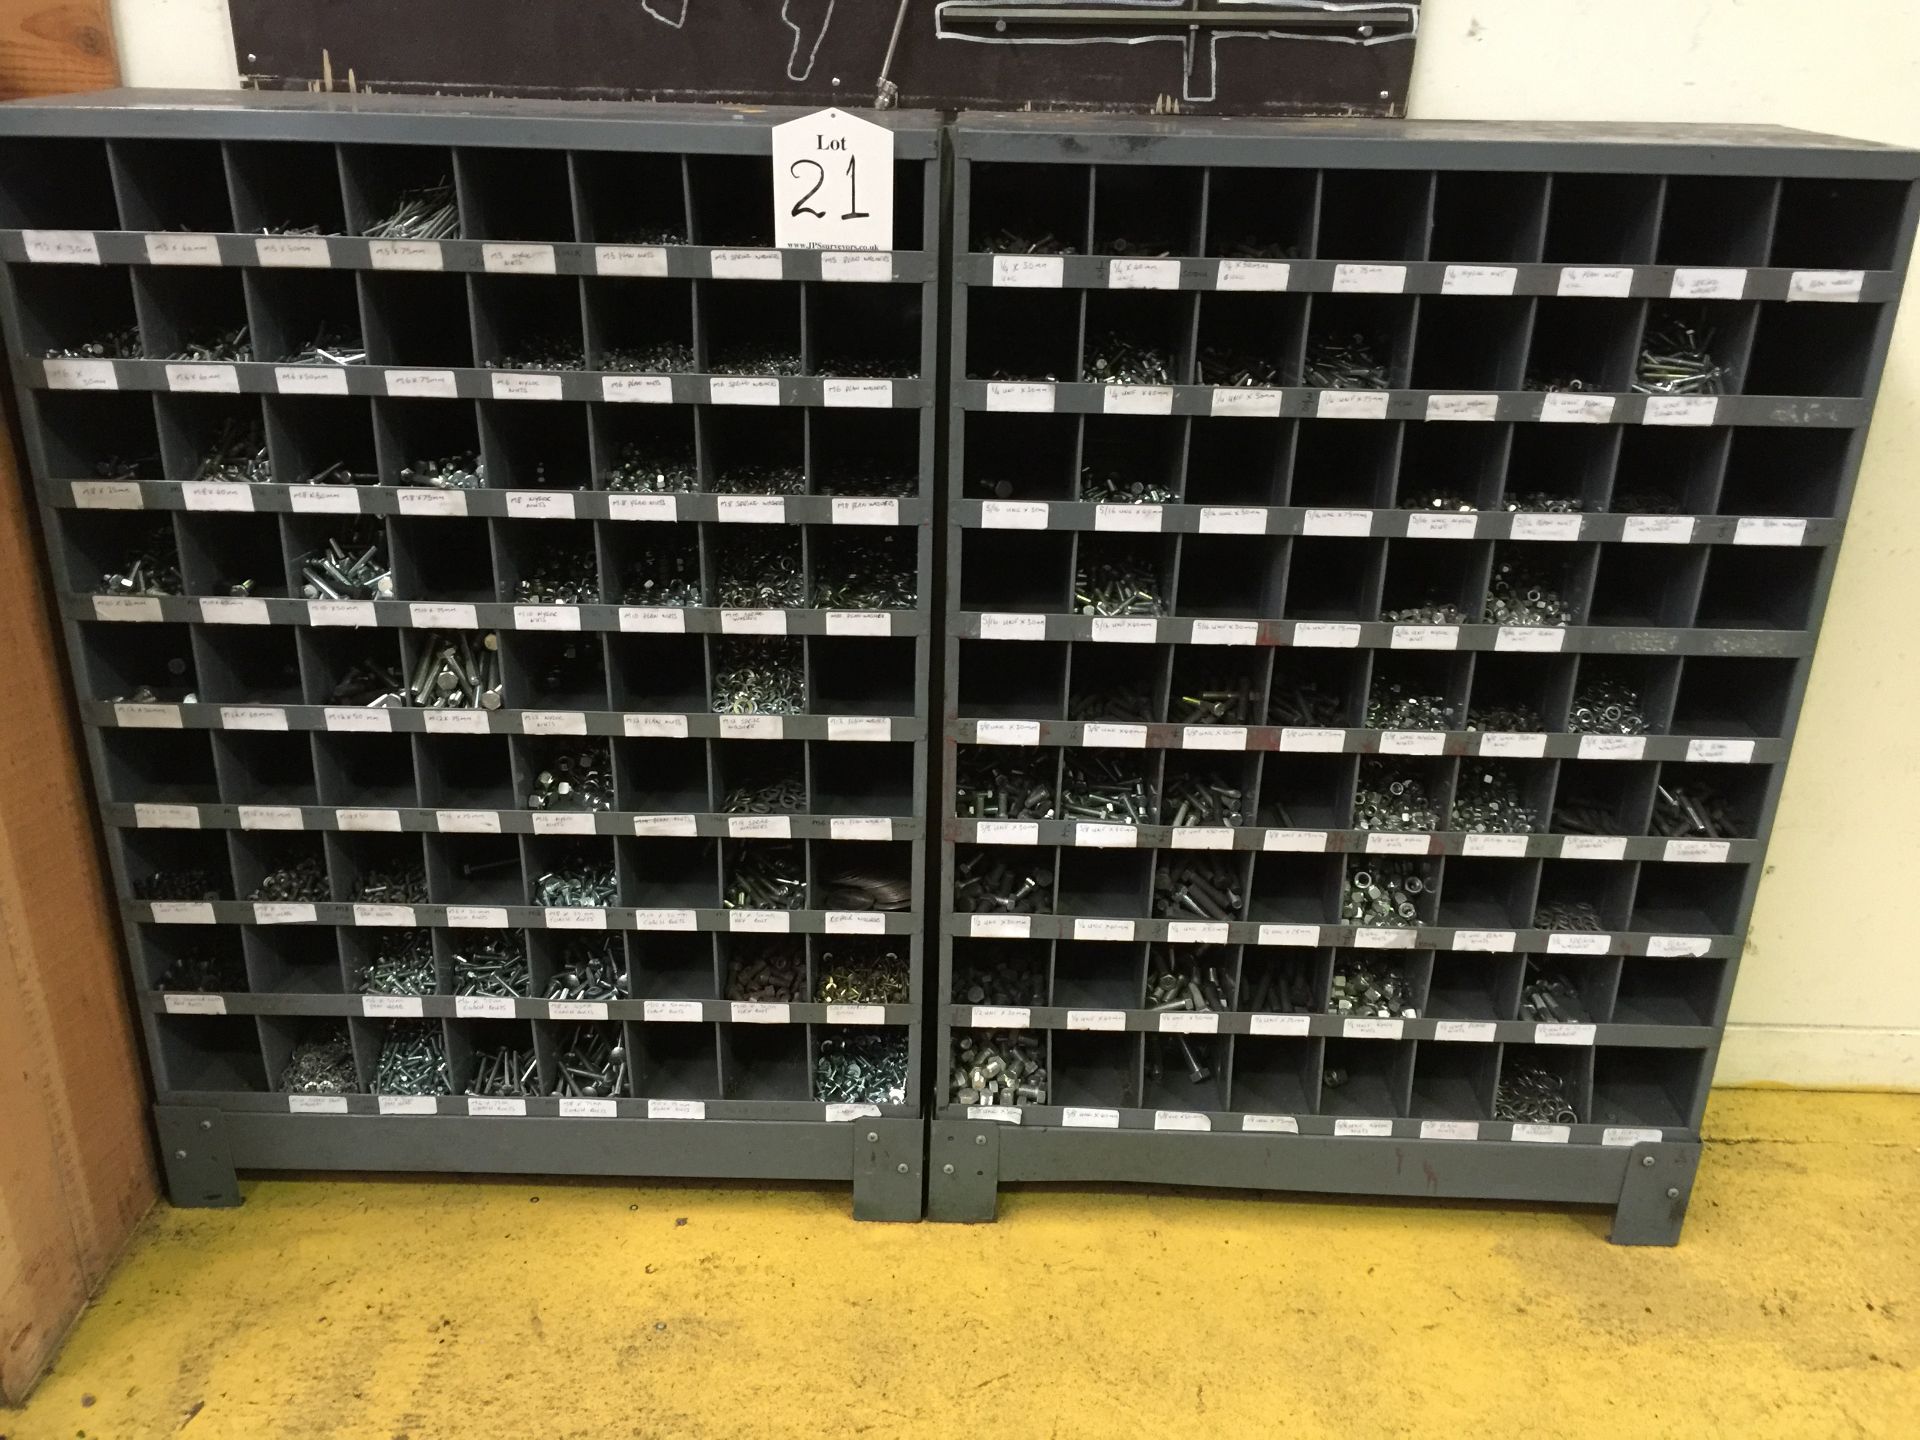 2 Pigeon Hole Racks Containing Fasteners